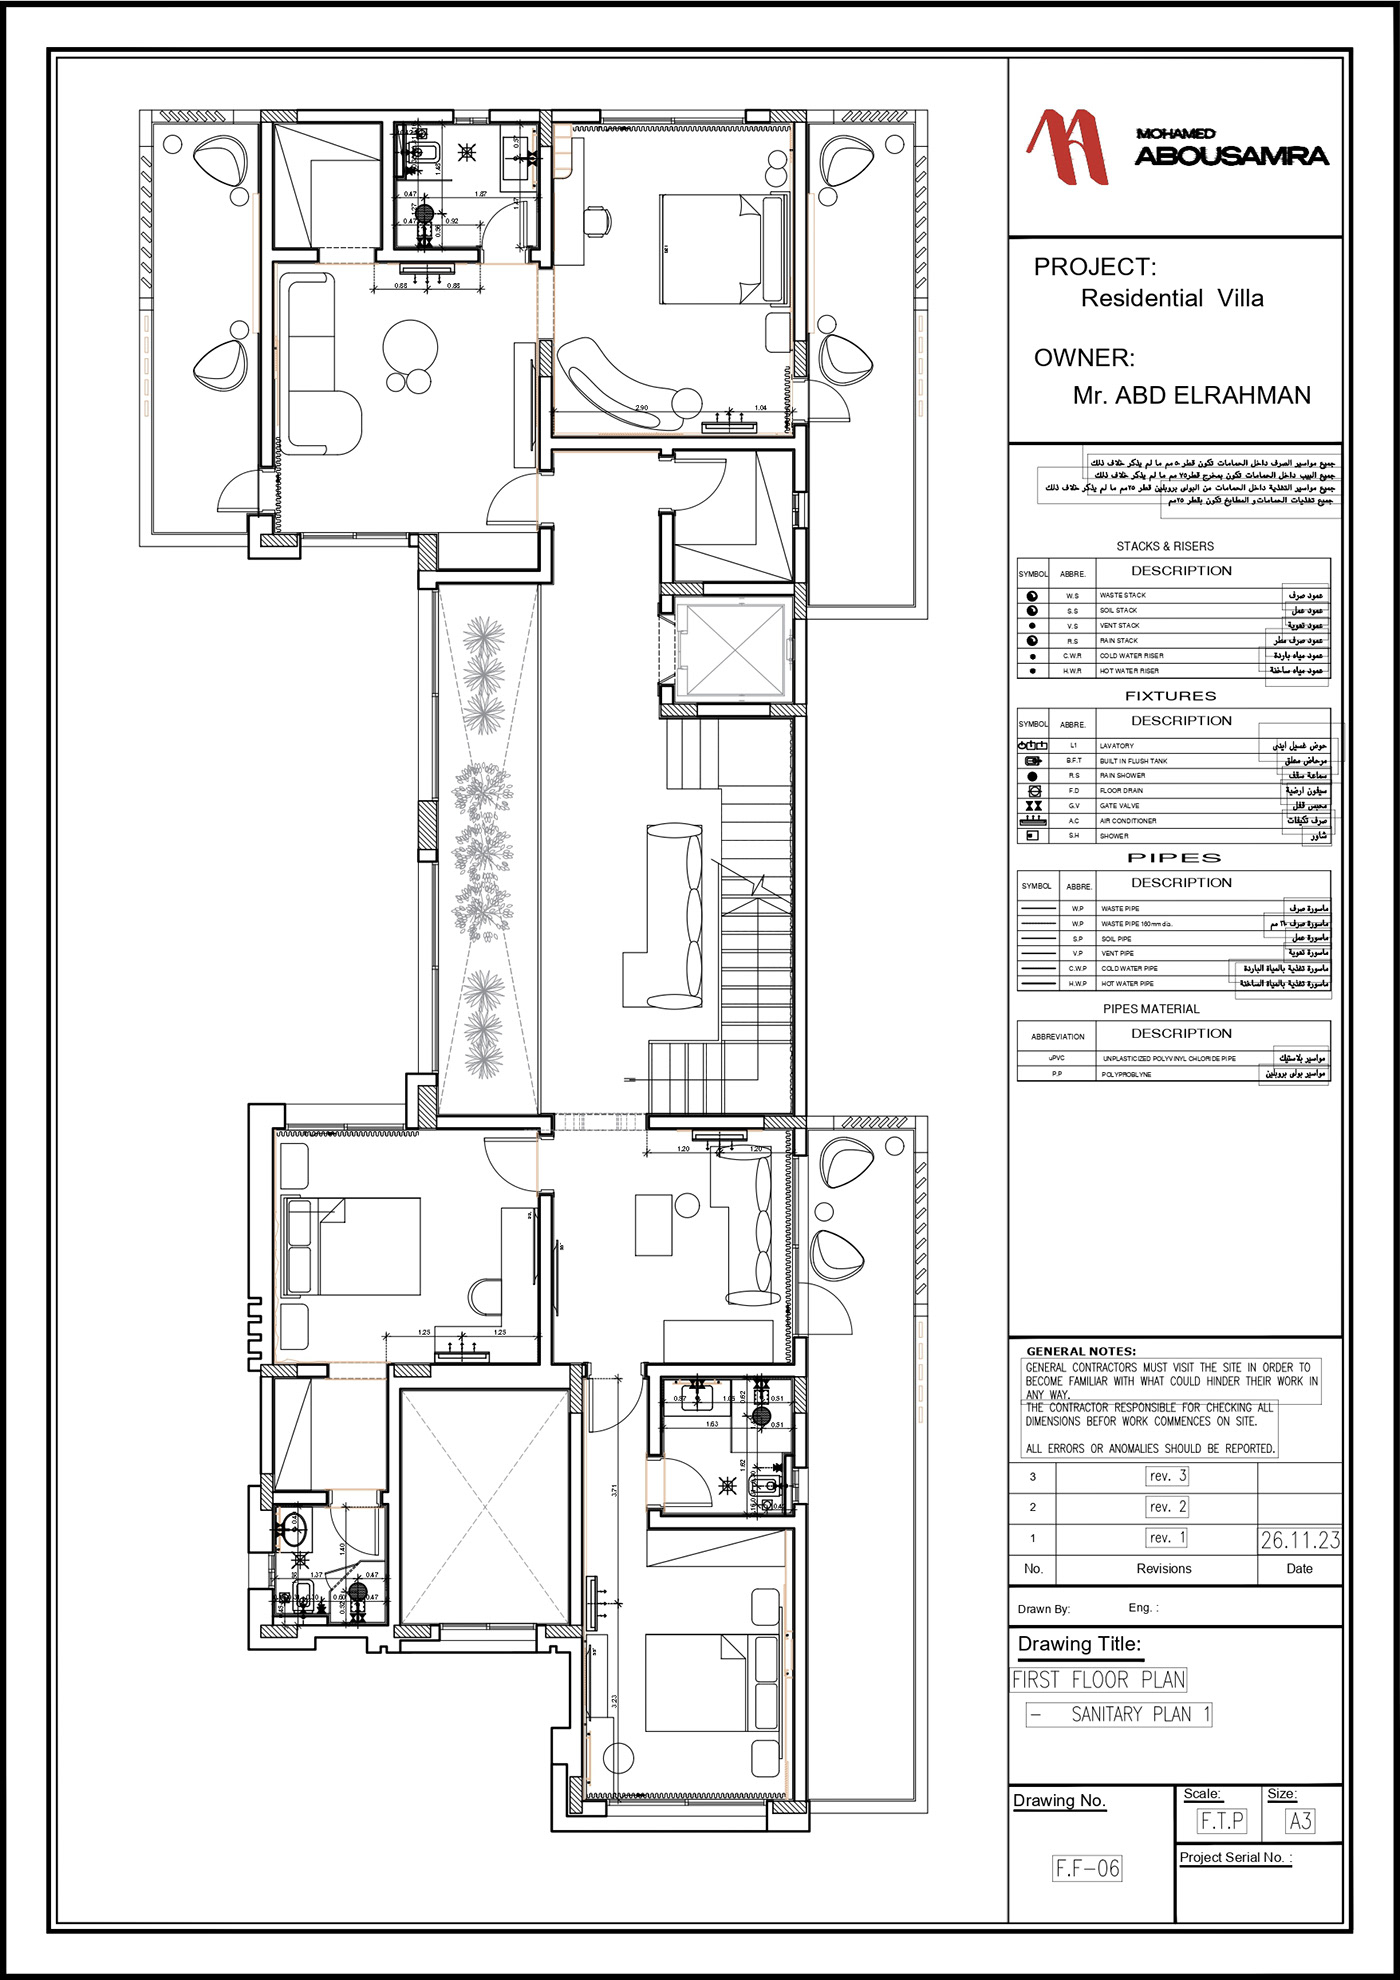 Drawing  architecture interior design  working drawings shop drawing details Interior indoor visualization technical drawing